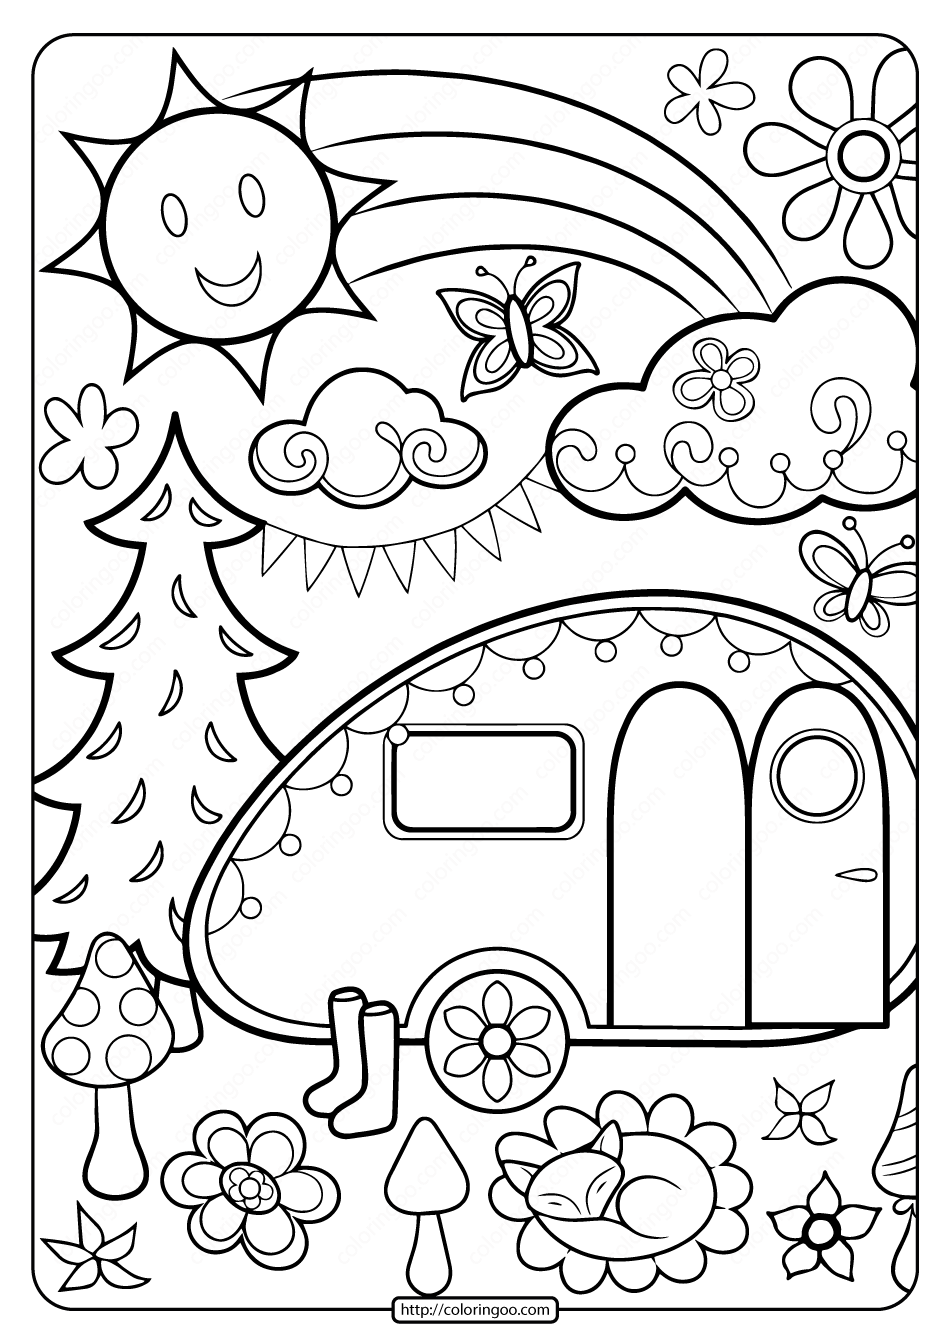 Printable Happy Campers Coloring Page | Camping coloring pages, Summer coloring  pages, Free coloring pages